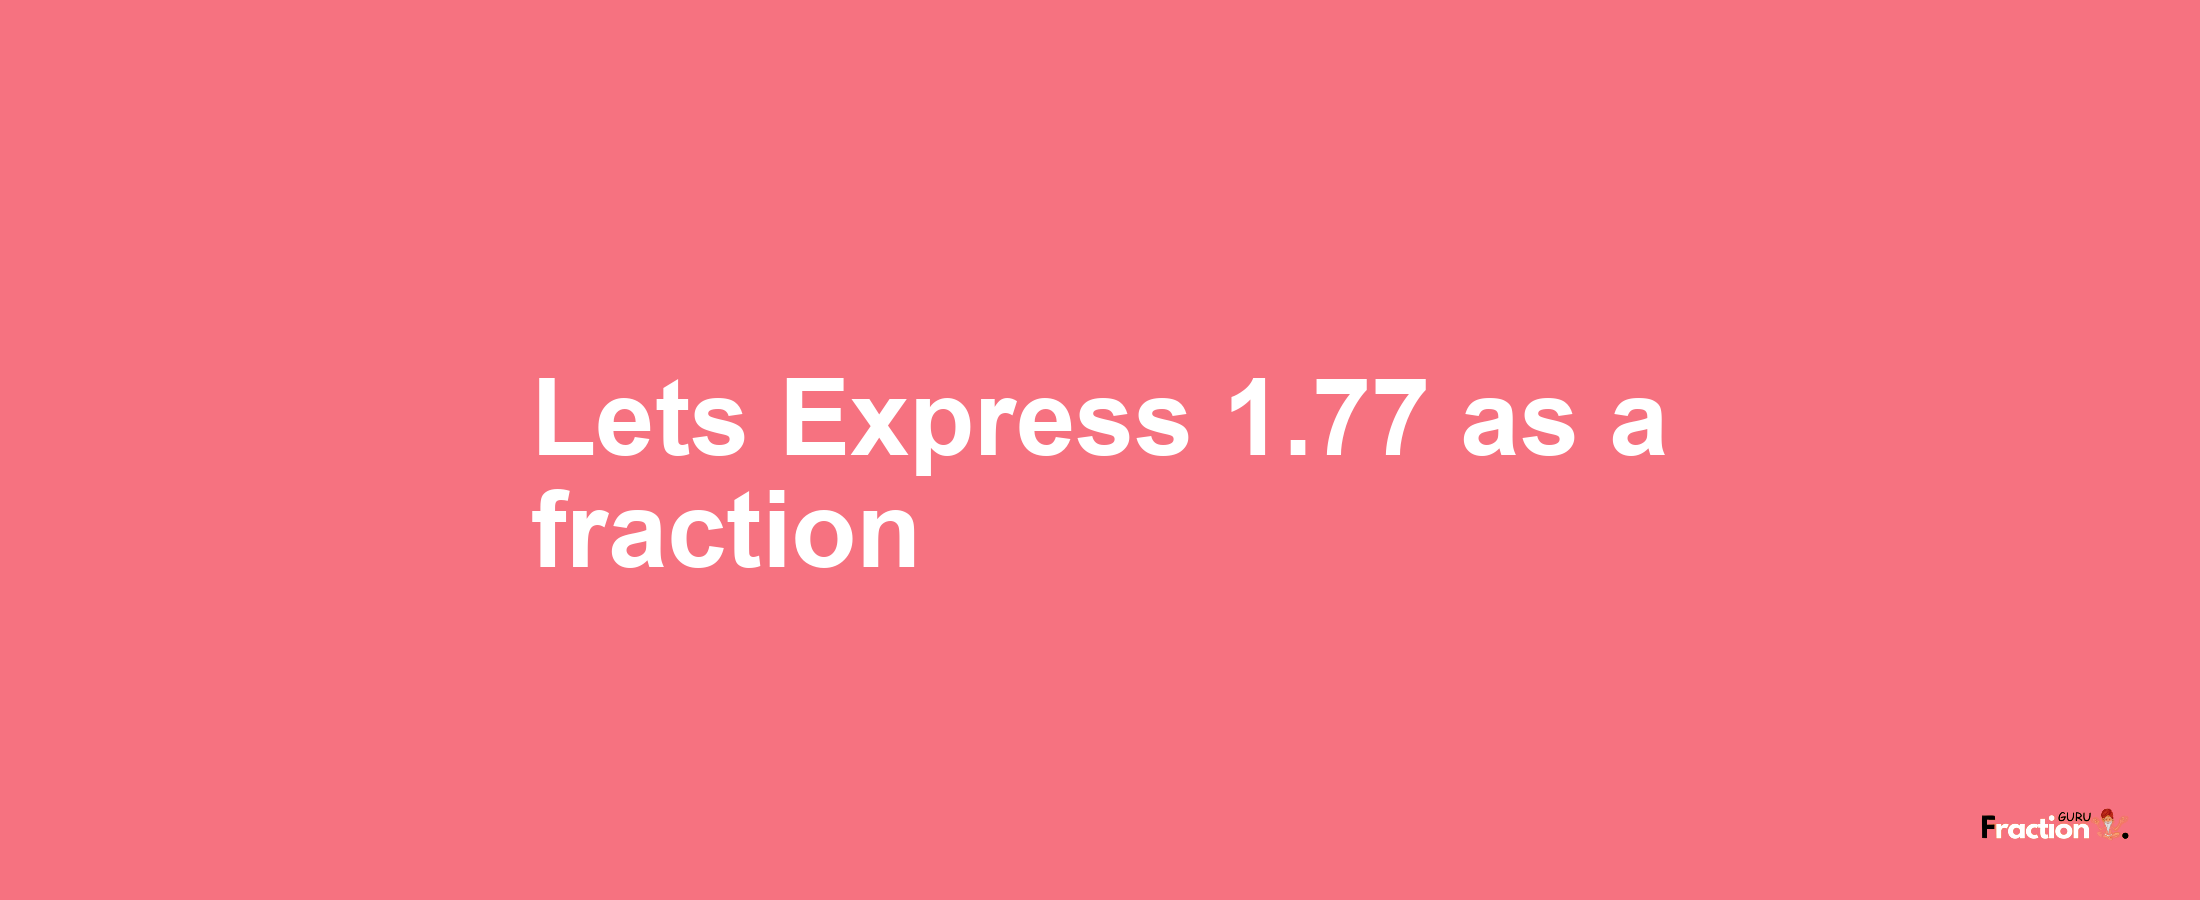 Lets Express 1.77 as afraction